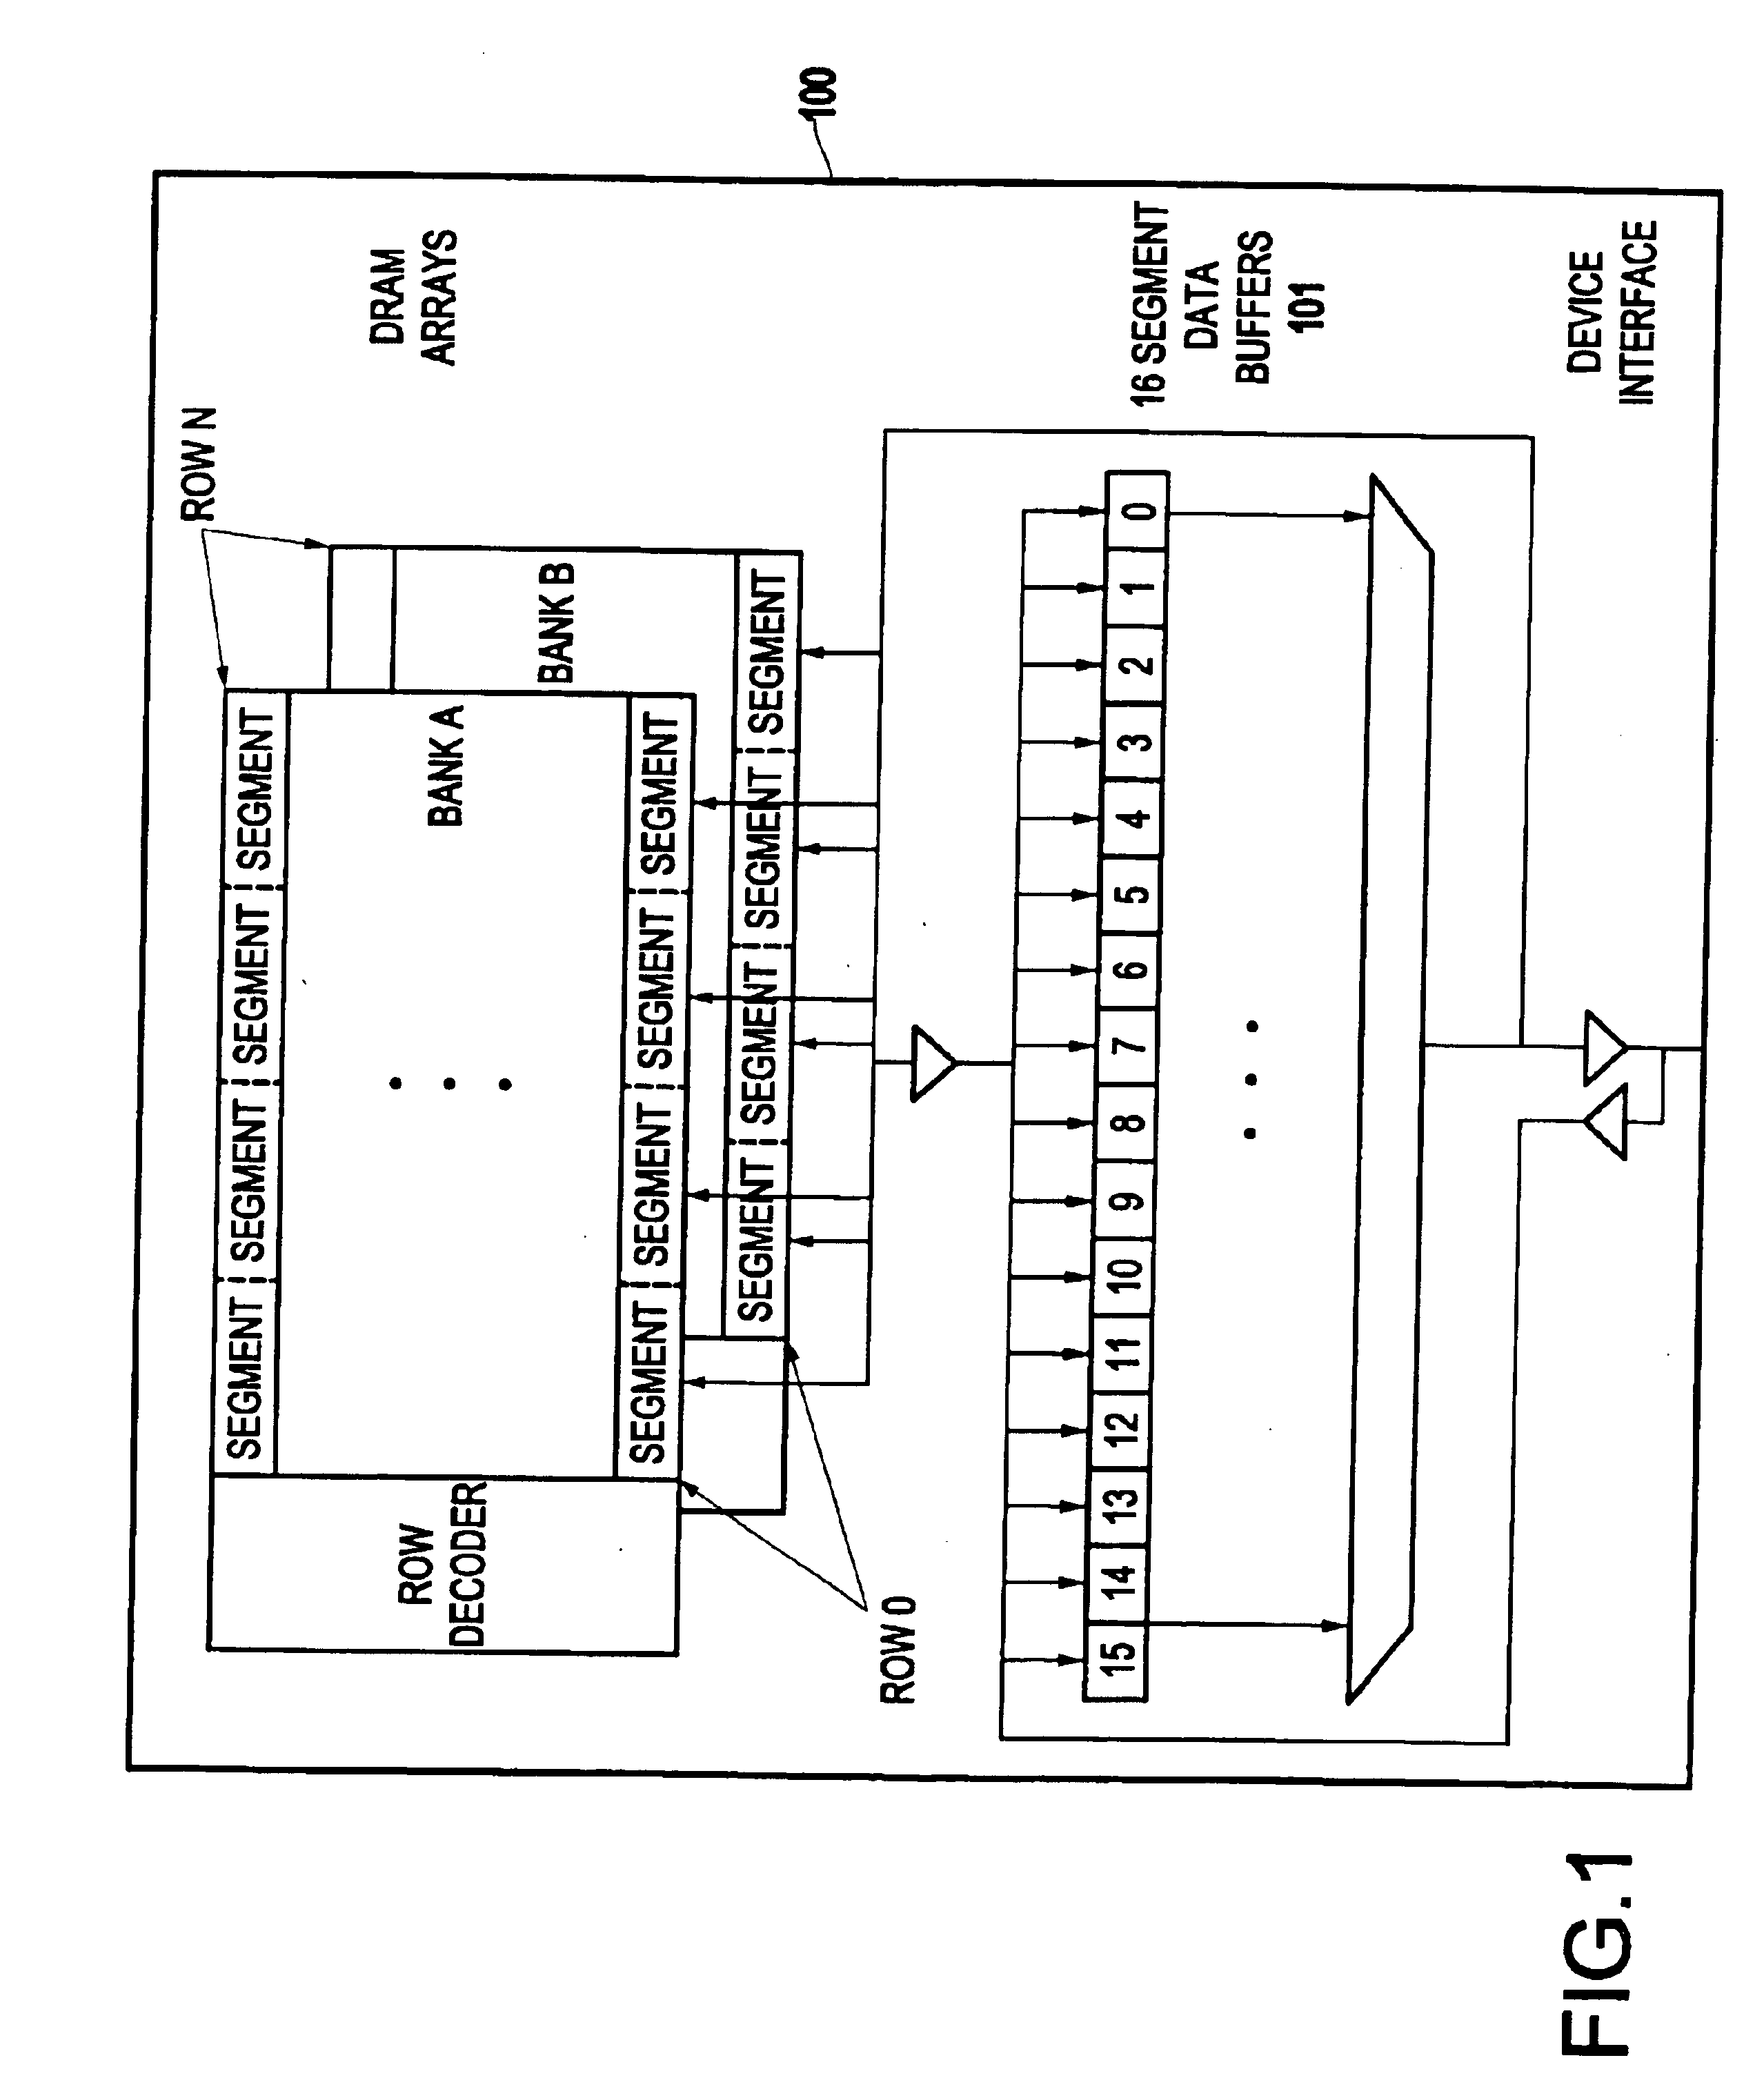 System and method for dynamically allocating associative resources